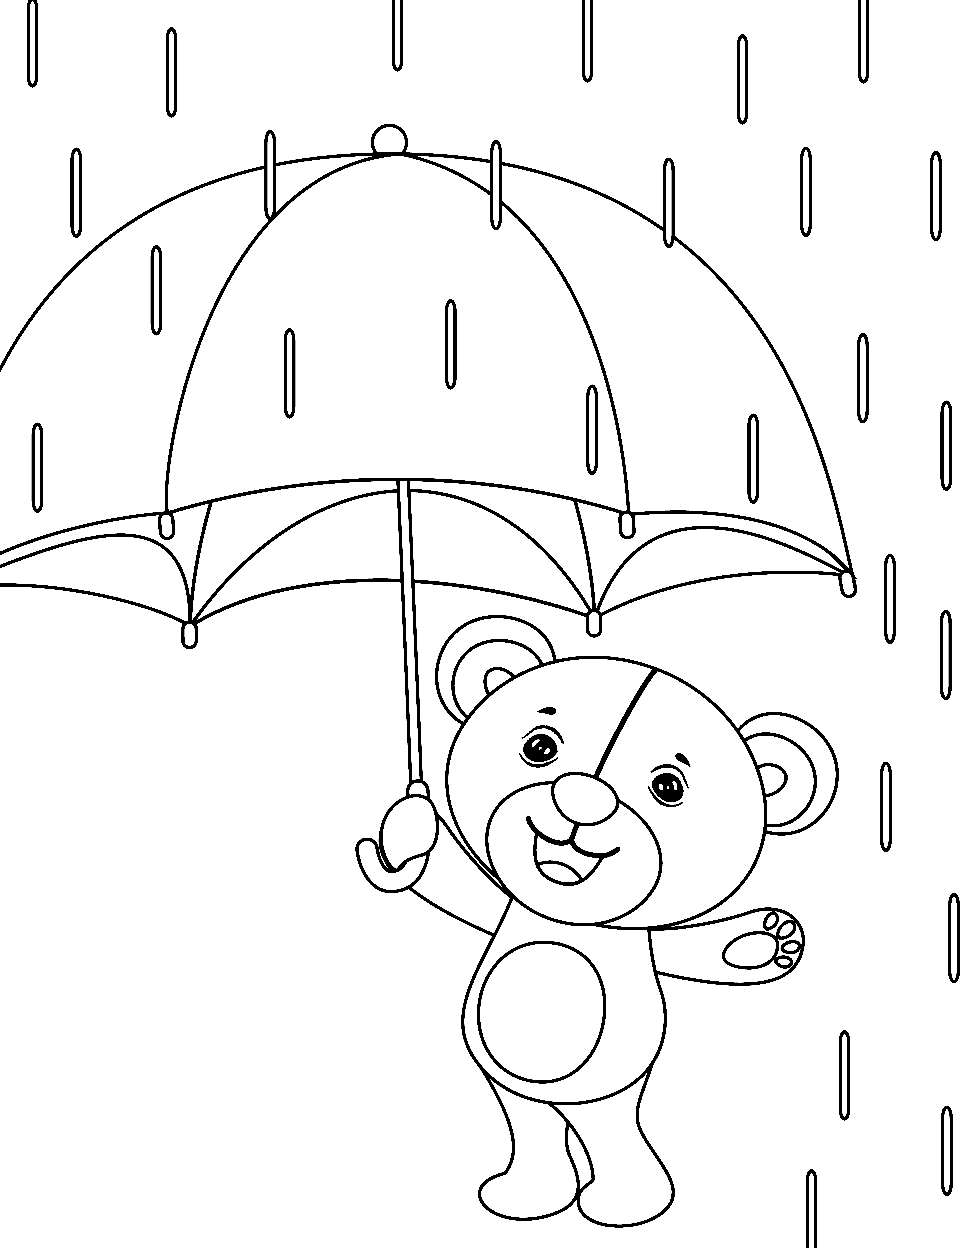 Rainy Day Bear Coloring Page - A cute bear with an umbrella enjoying the rainy day.